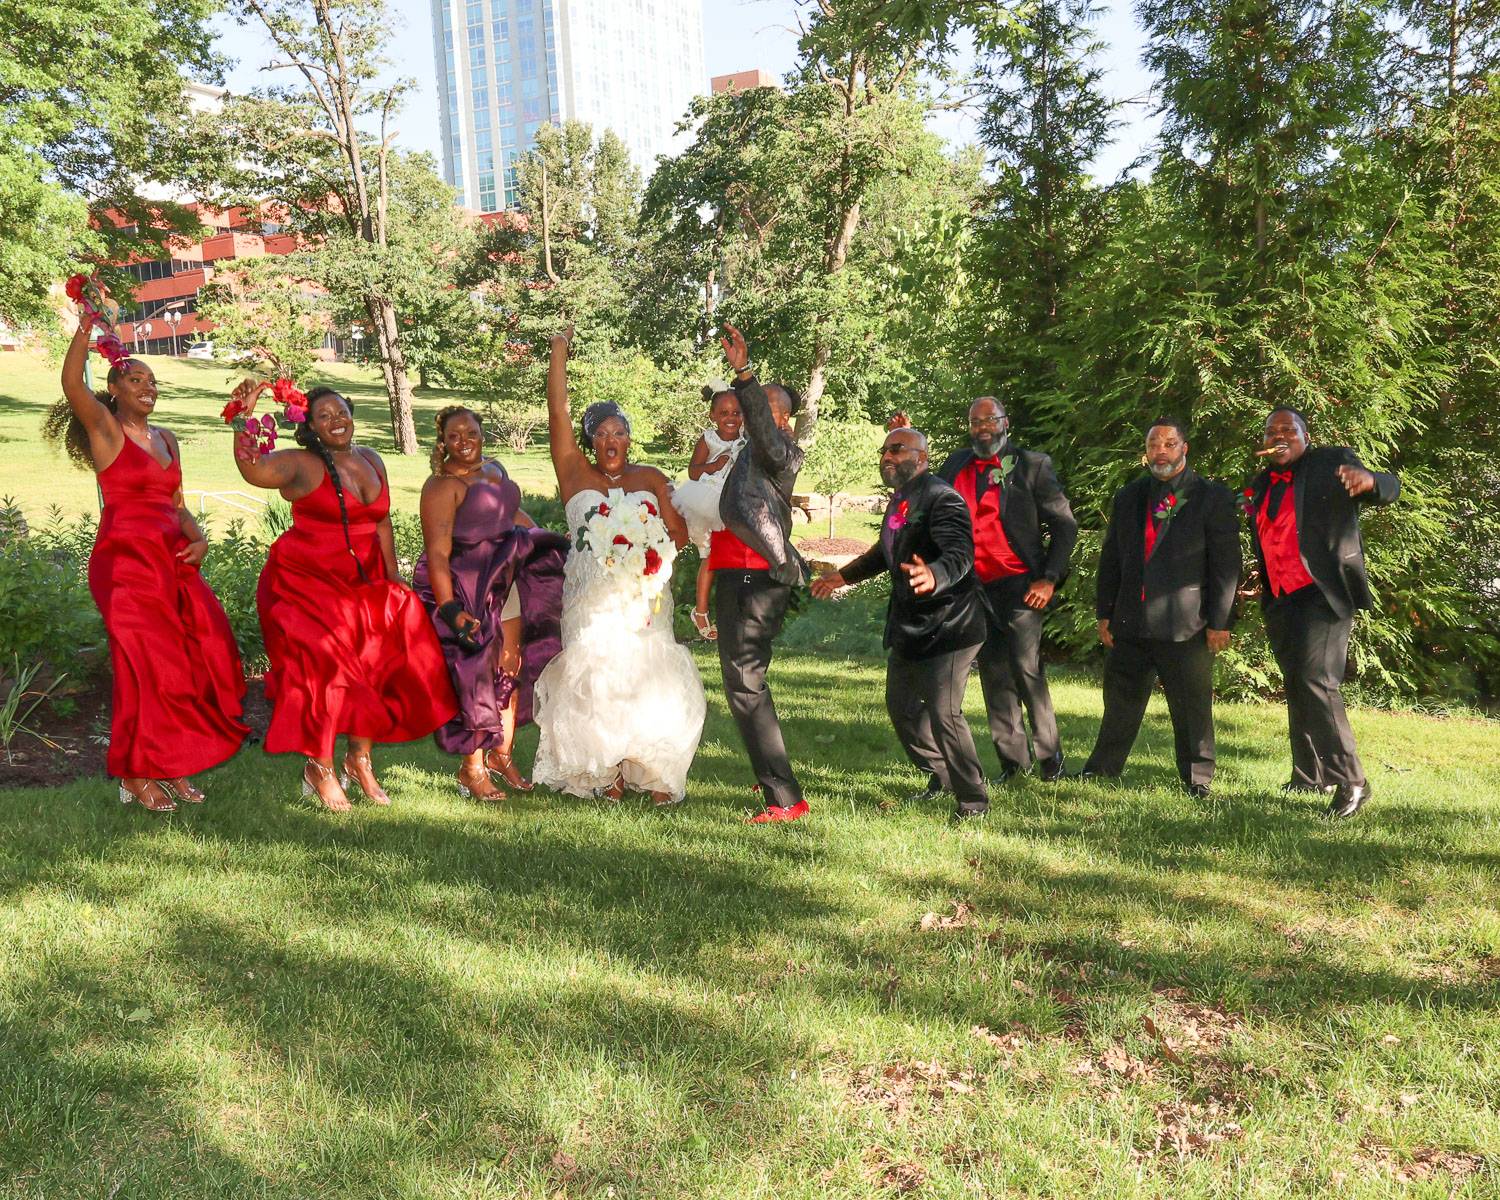 The newlyweds and their attendants jumping